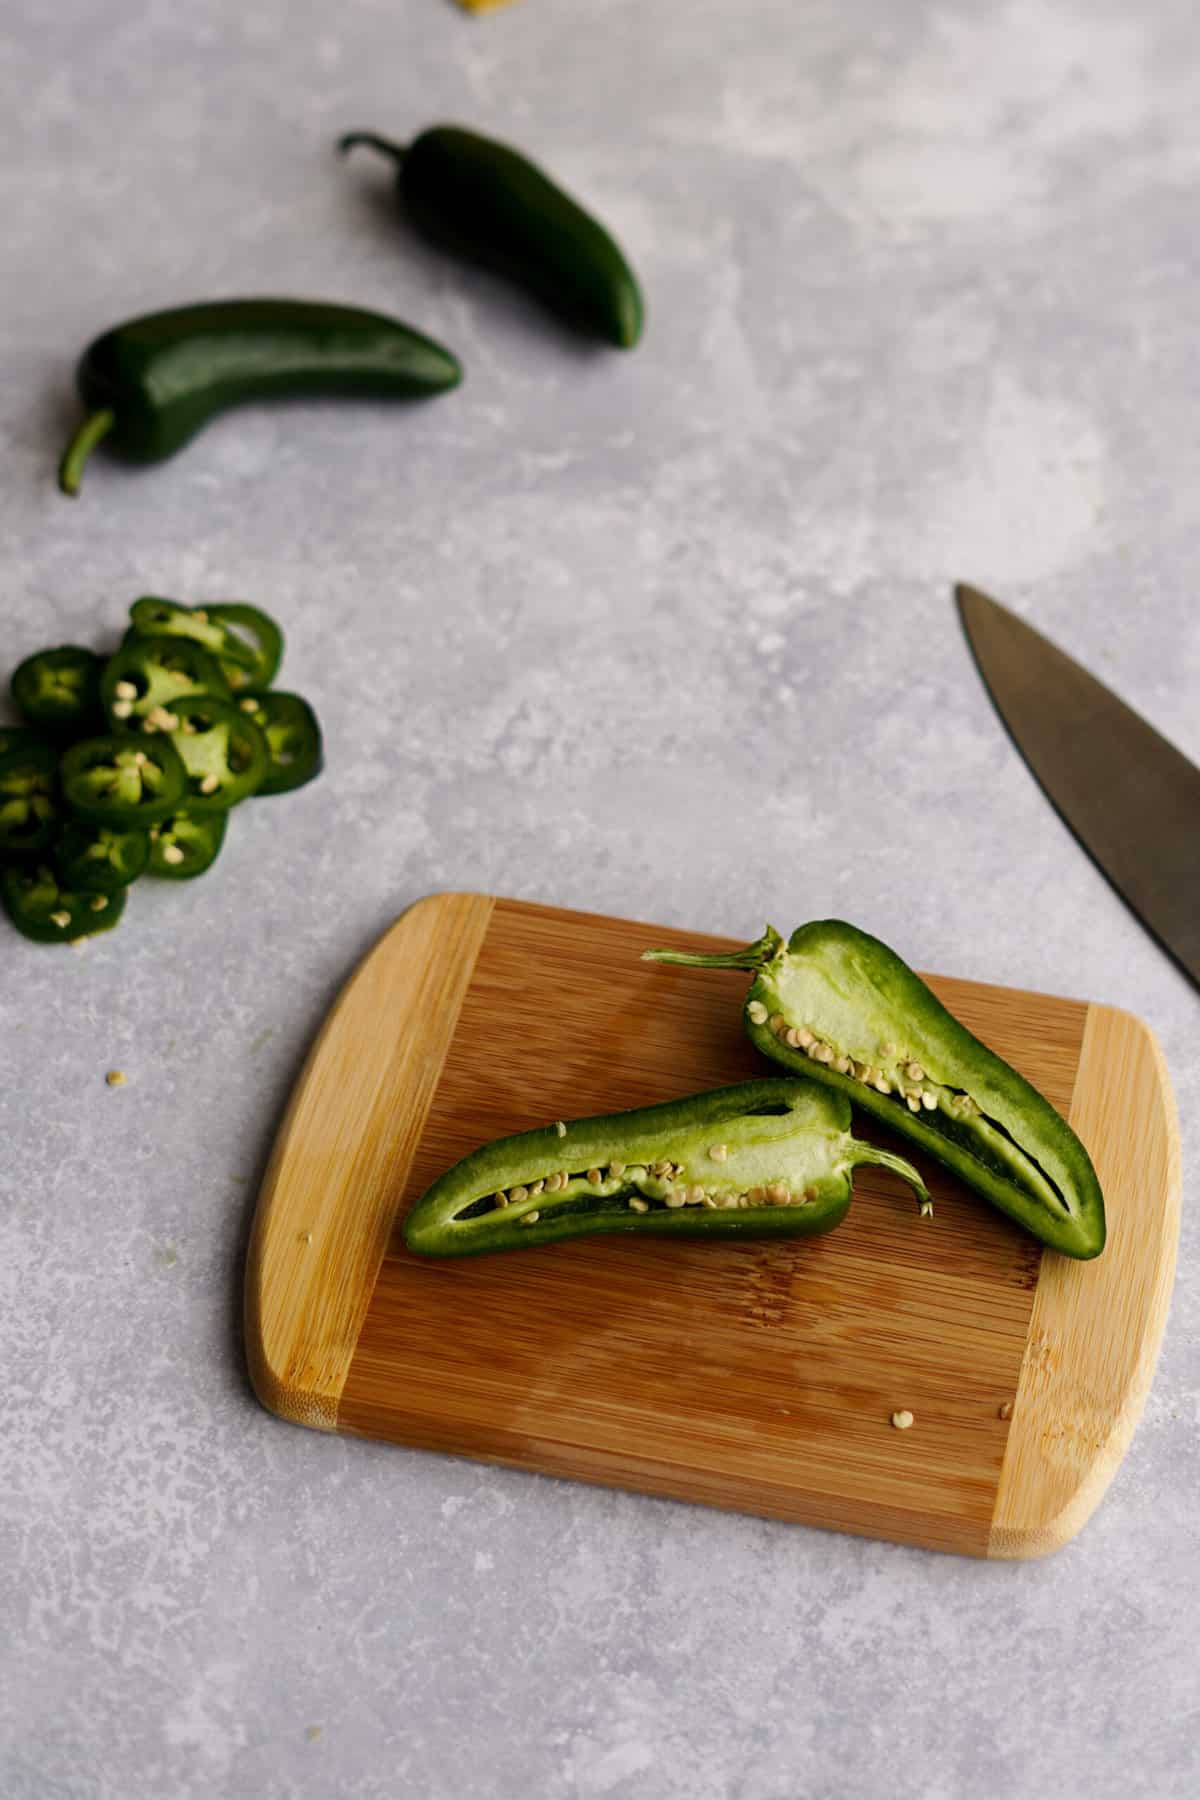 jalapeño peppers being sliced on a cutting board, in preparation to make jalapeno infused tequila.